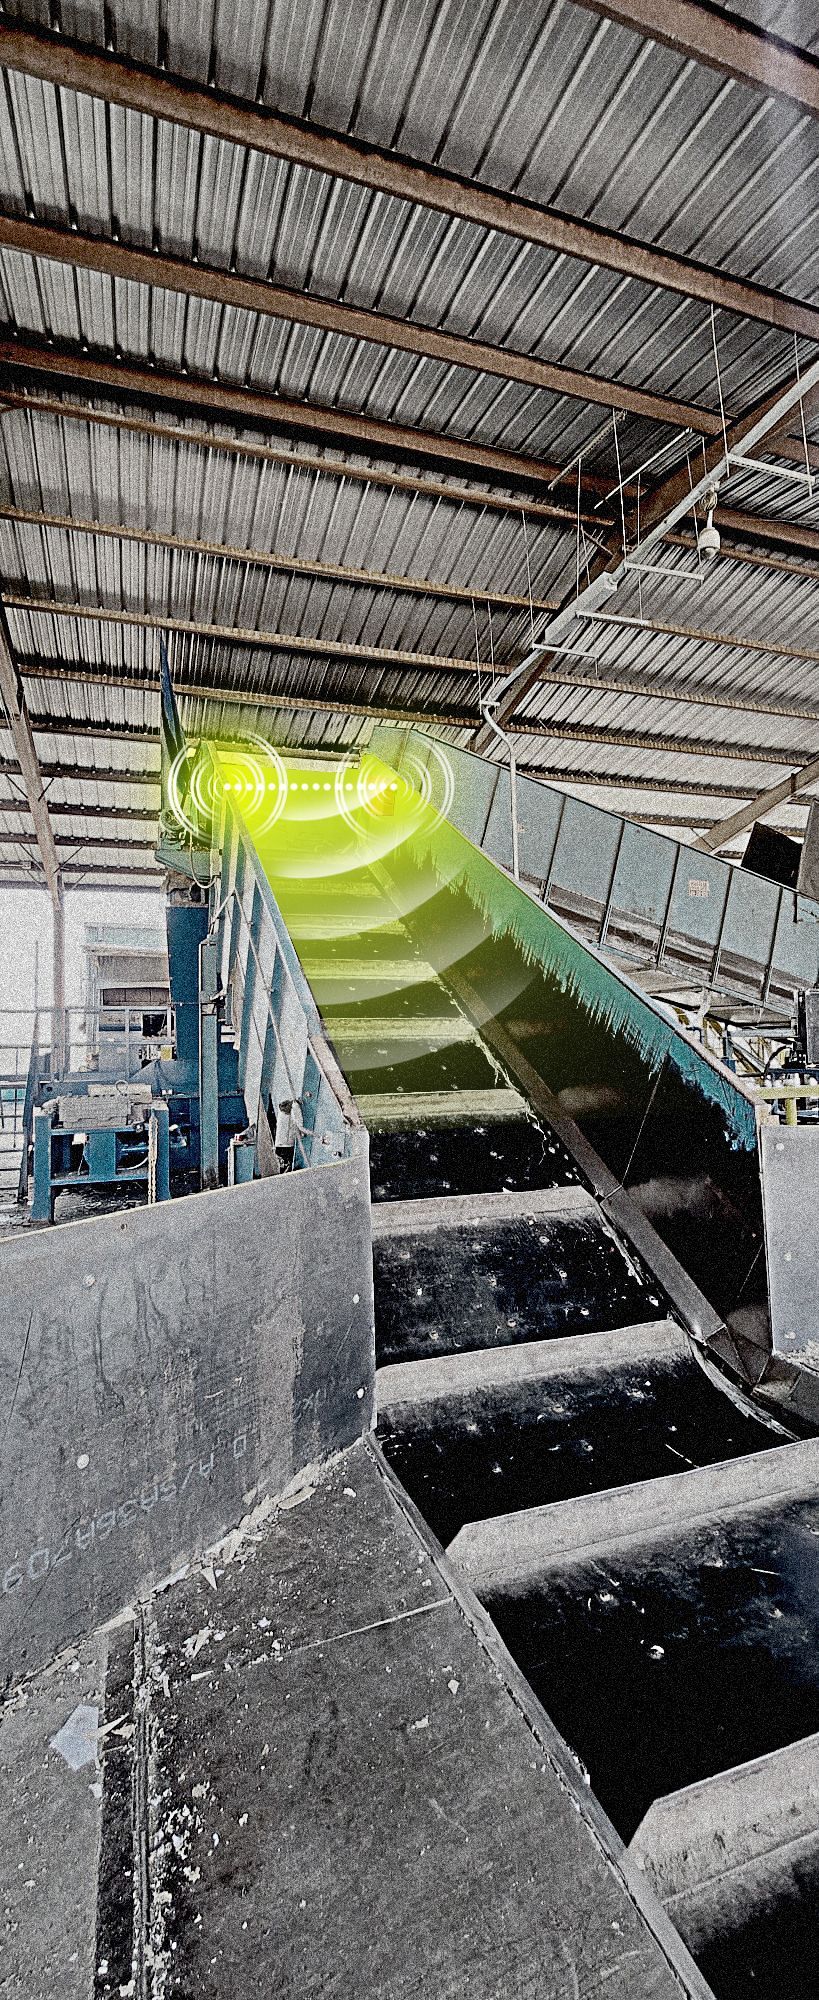 A conveyor belt in a factory with a yellow light coming out of it.